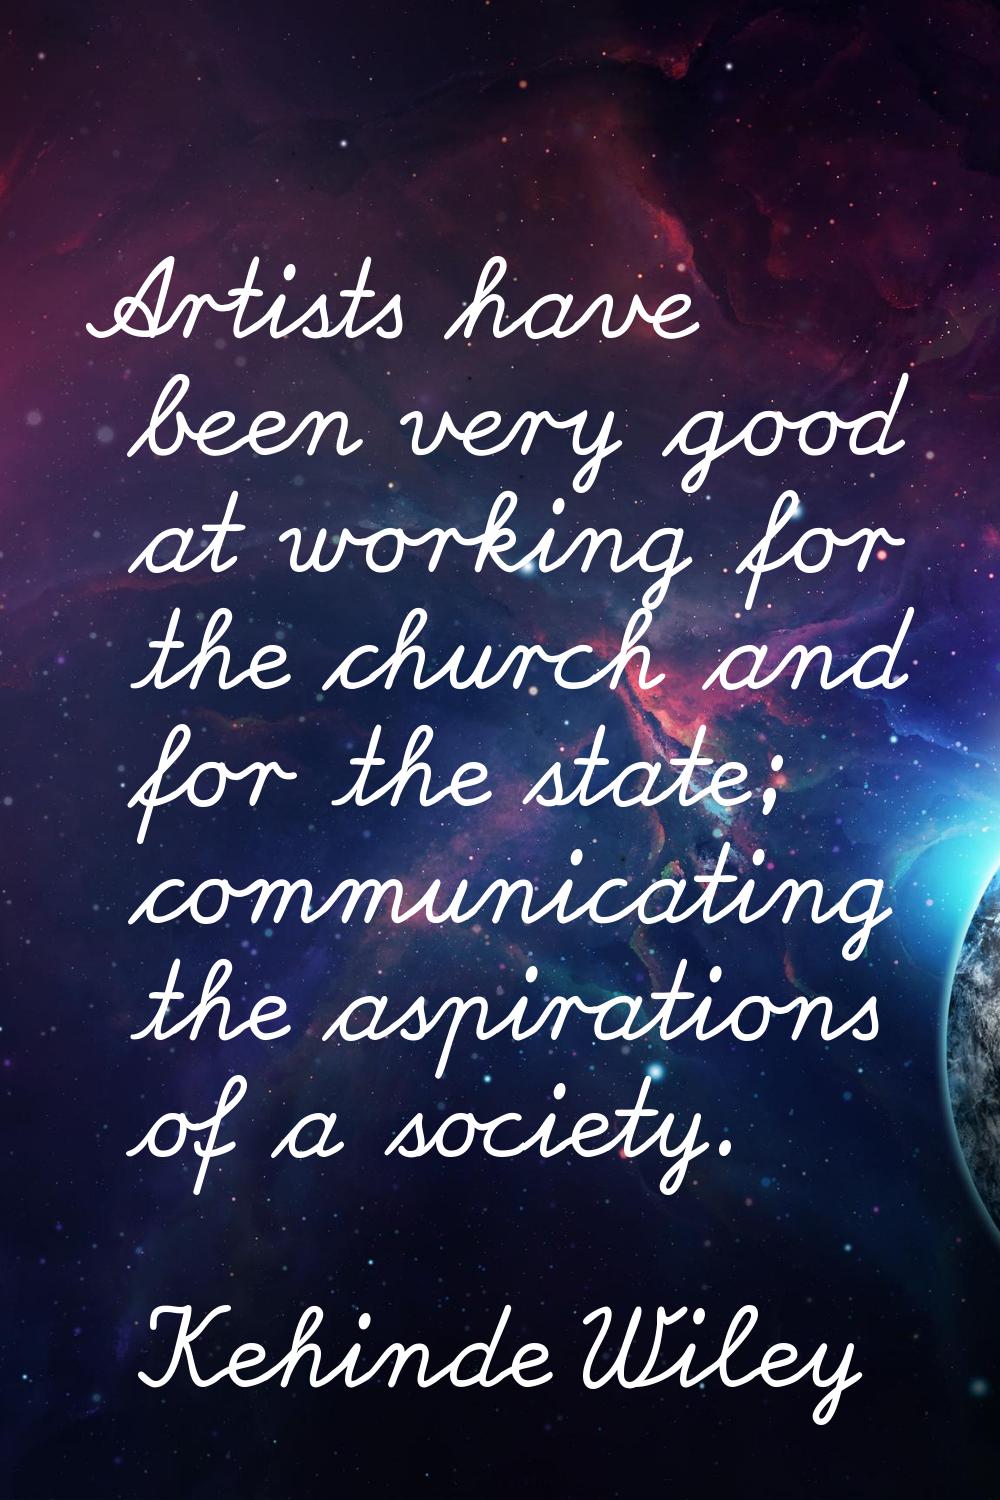 Artists have been very good at working for the church and for the state; communicating the aspirati